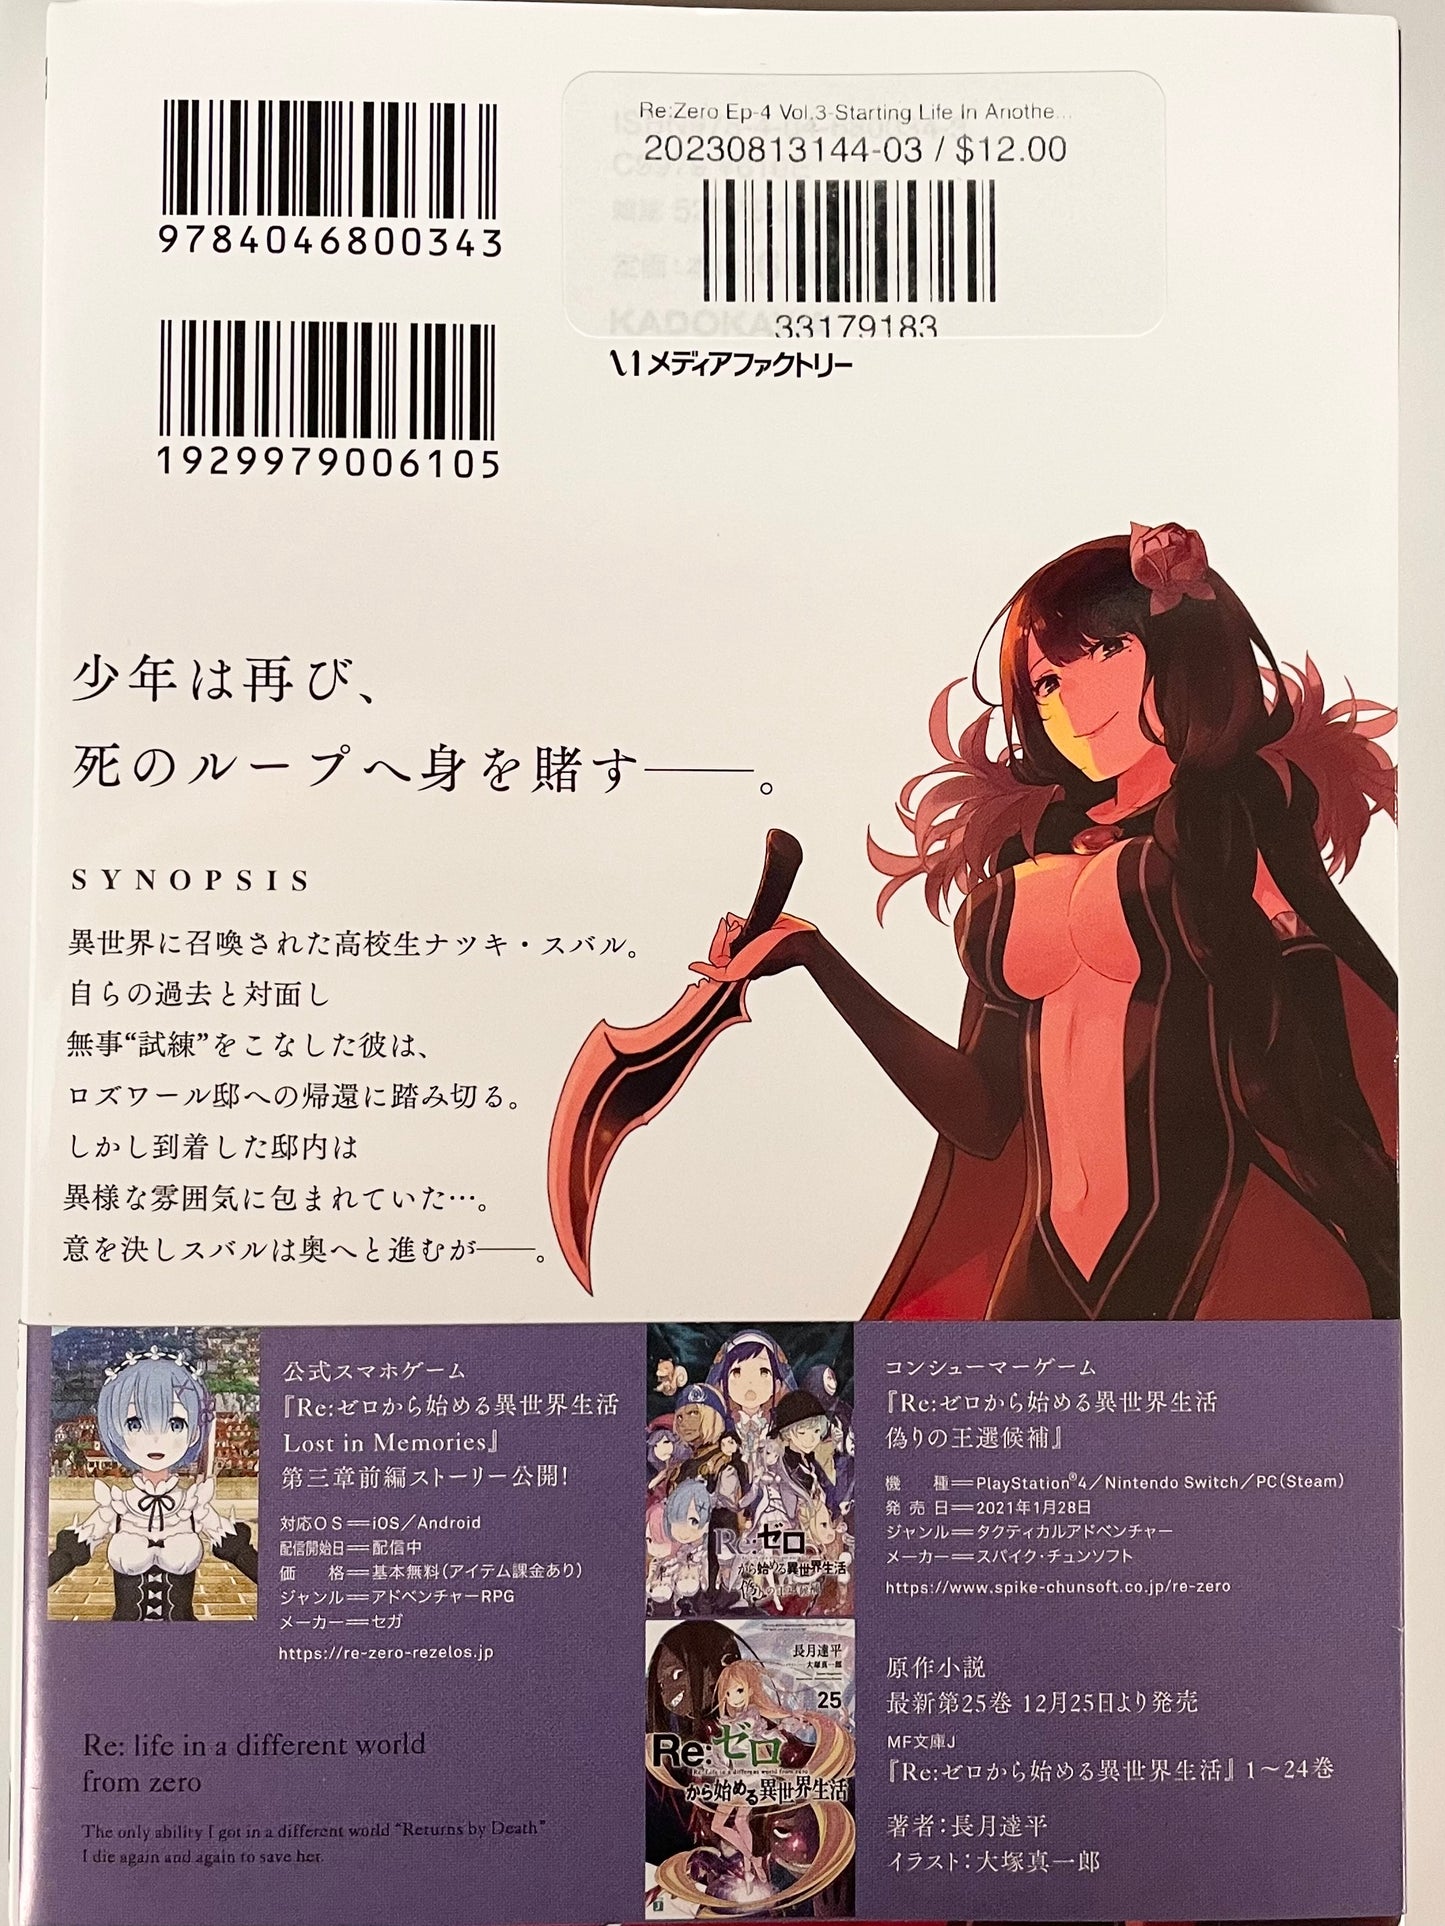 Re:Zero Ep-4 Vol.3-Starting Life In Another World-Official Japanese Edition